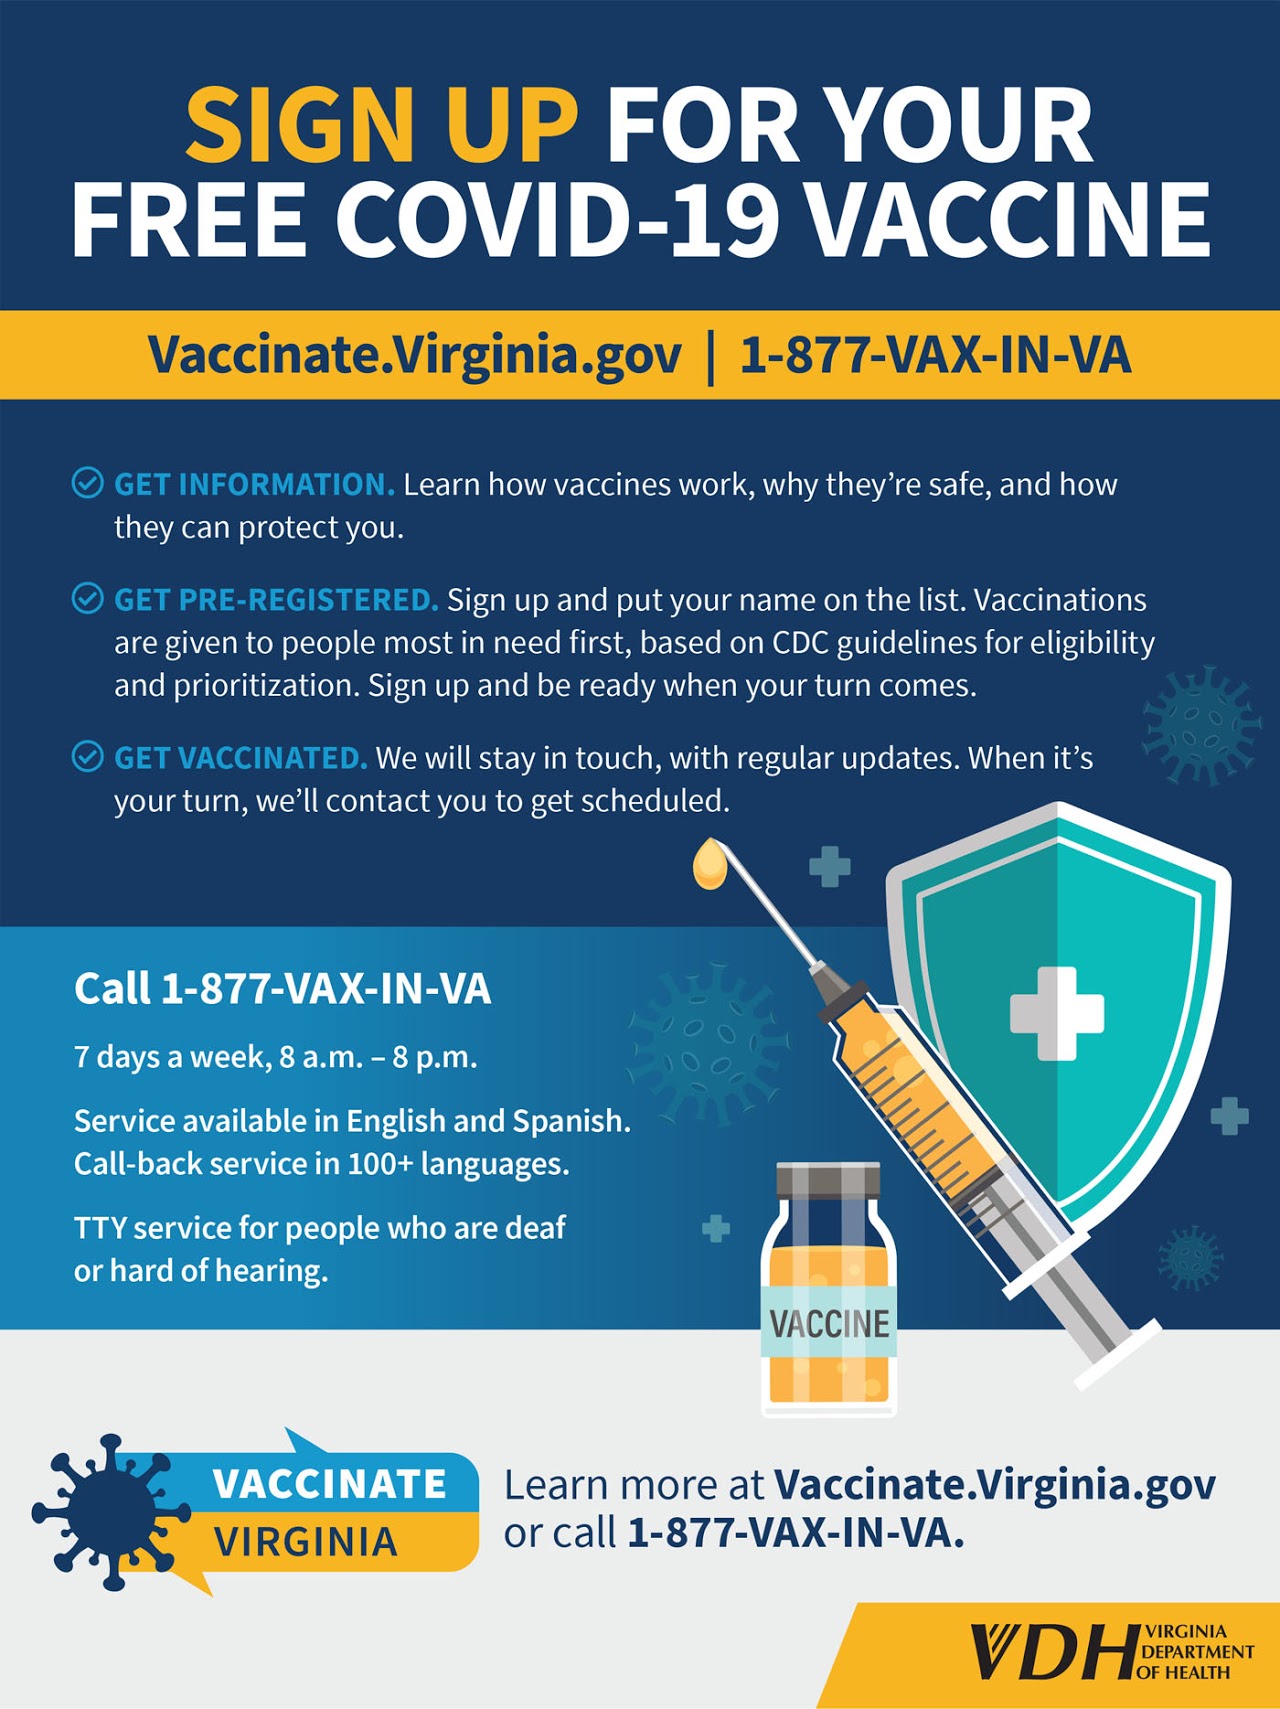 Sign Up for Your Free COVID-19 Vaccine